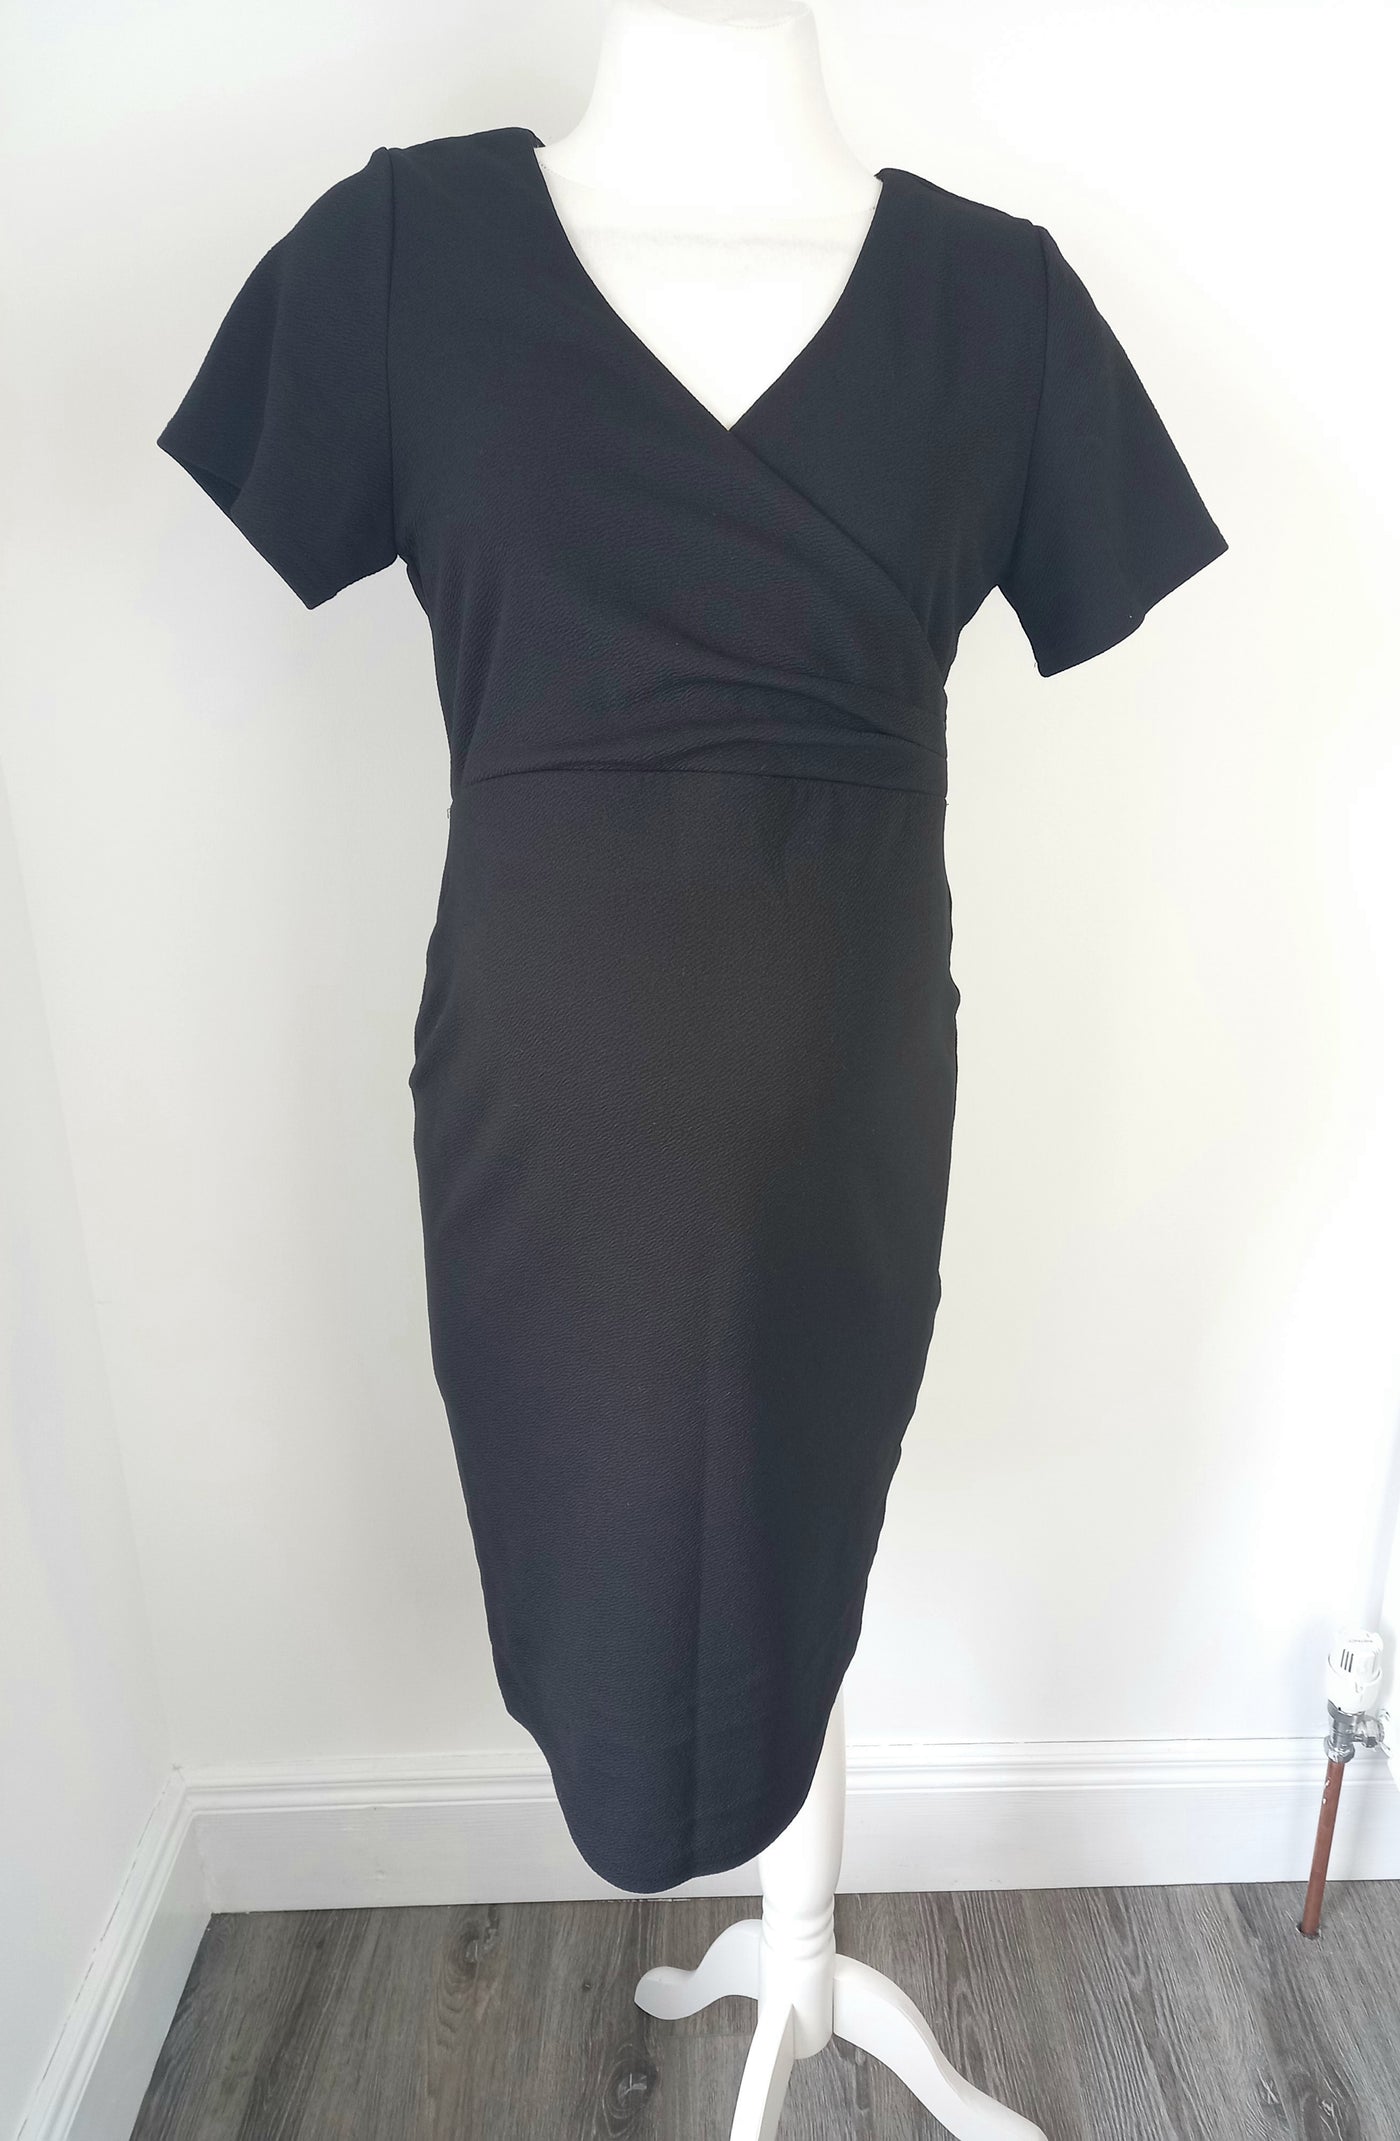 New Look Maternity black crossover front short sleeved dress - Size 12